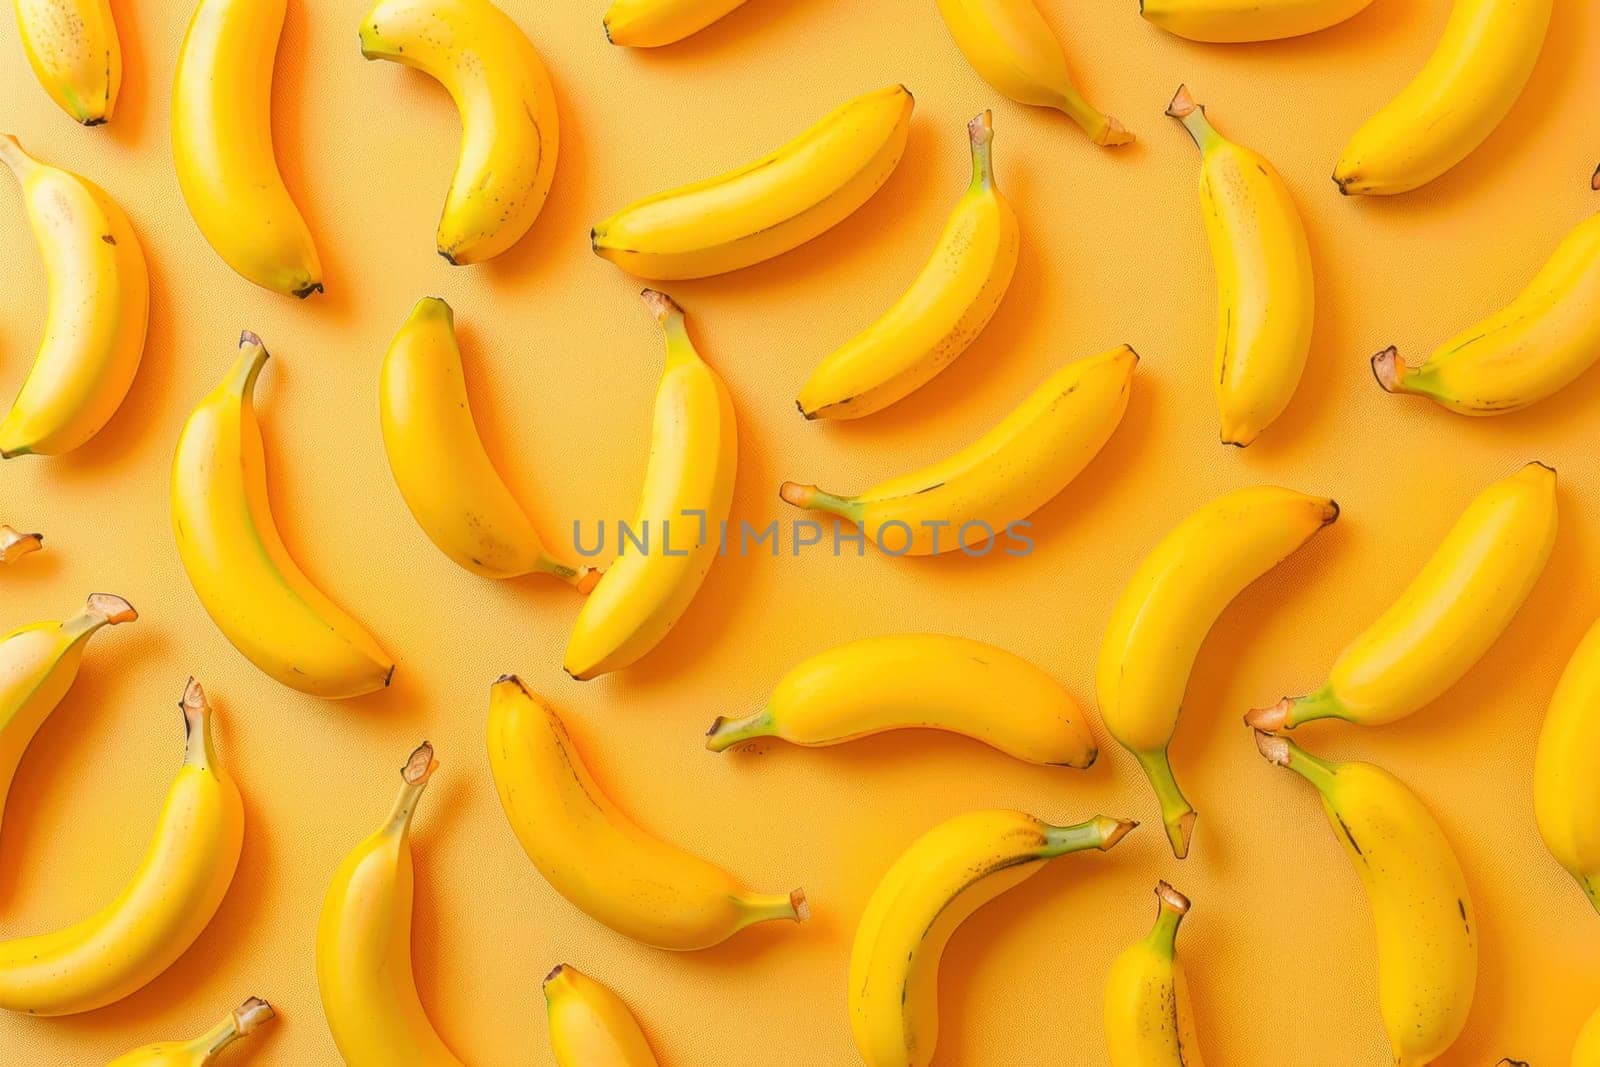 Fresh bananas arranged on vibrant yellow background in top view flat lay style for healthy food concept